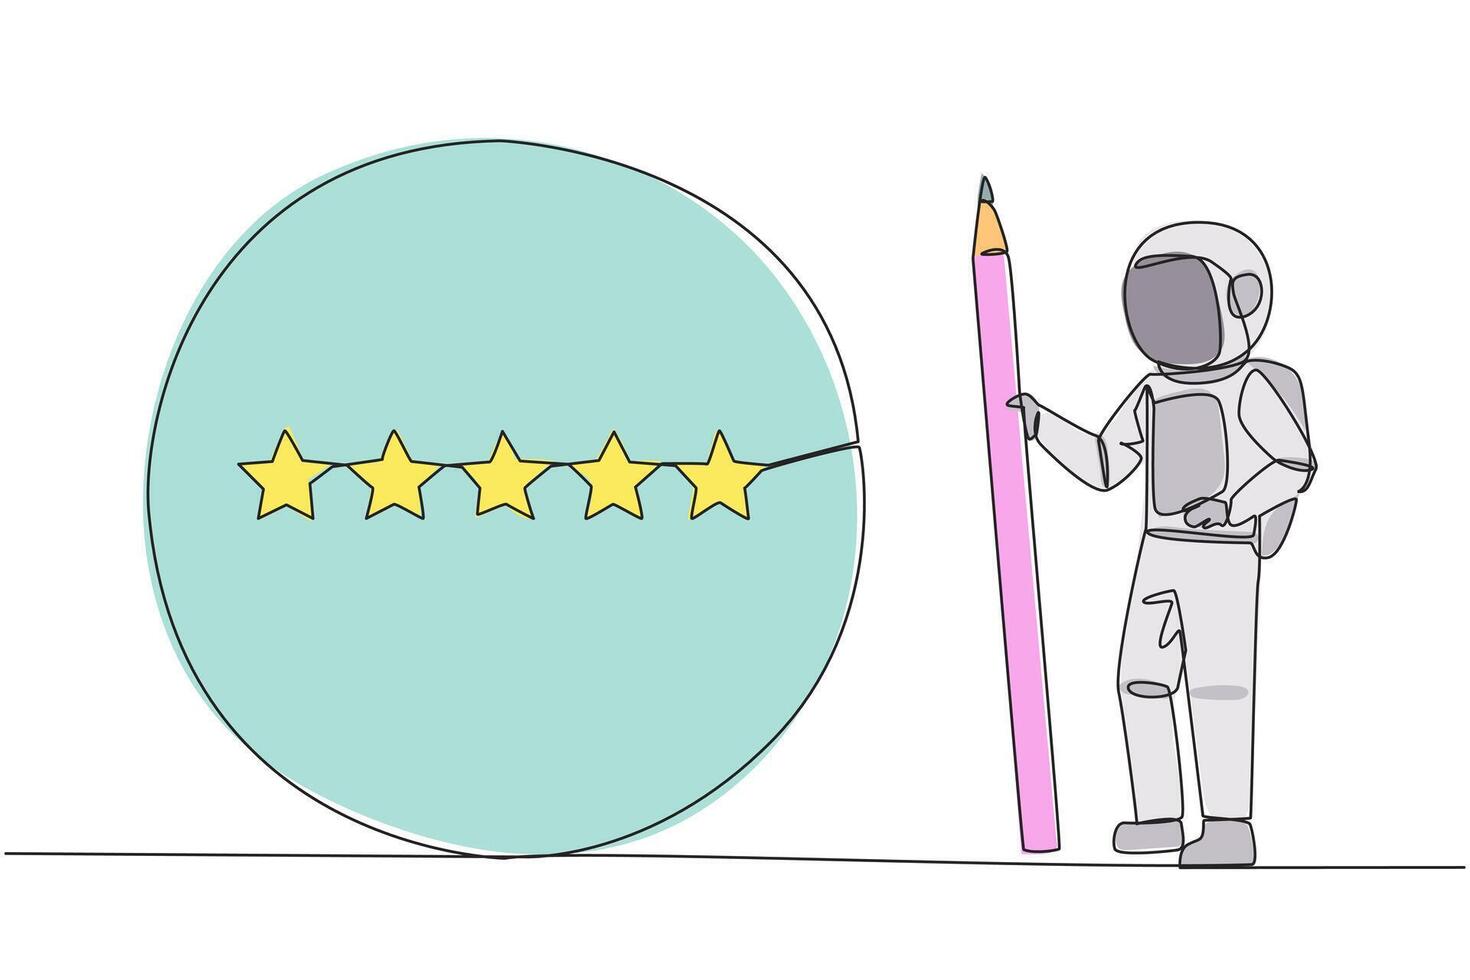 Continuous one line drawing astronaut stand holding large pencil and next to is a large circle encircling all 5 stars. Five star rating positive feedback. Cosmic. Single line draw illustration vector